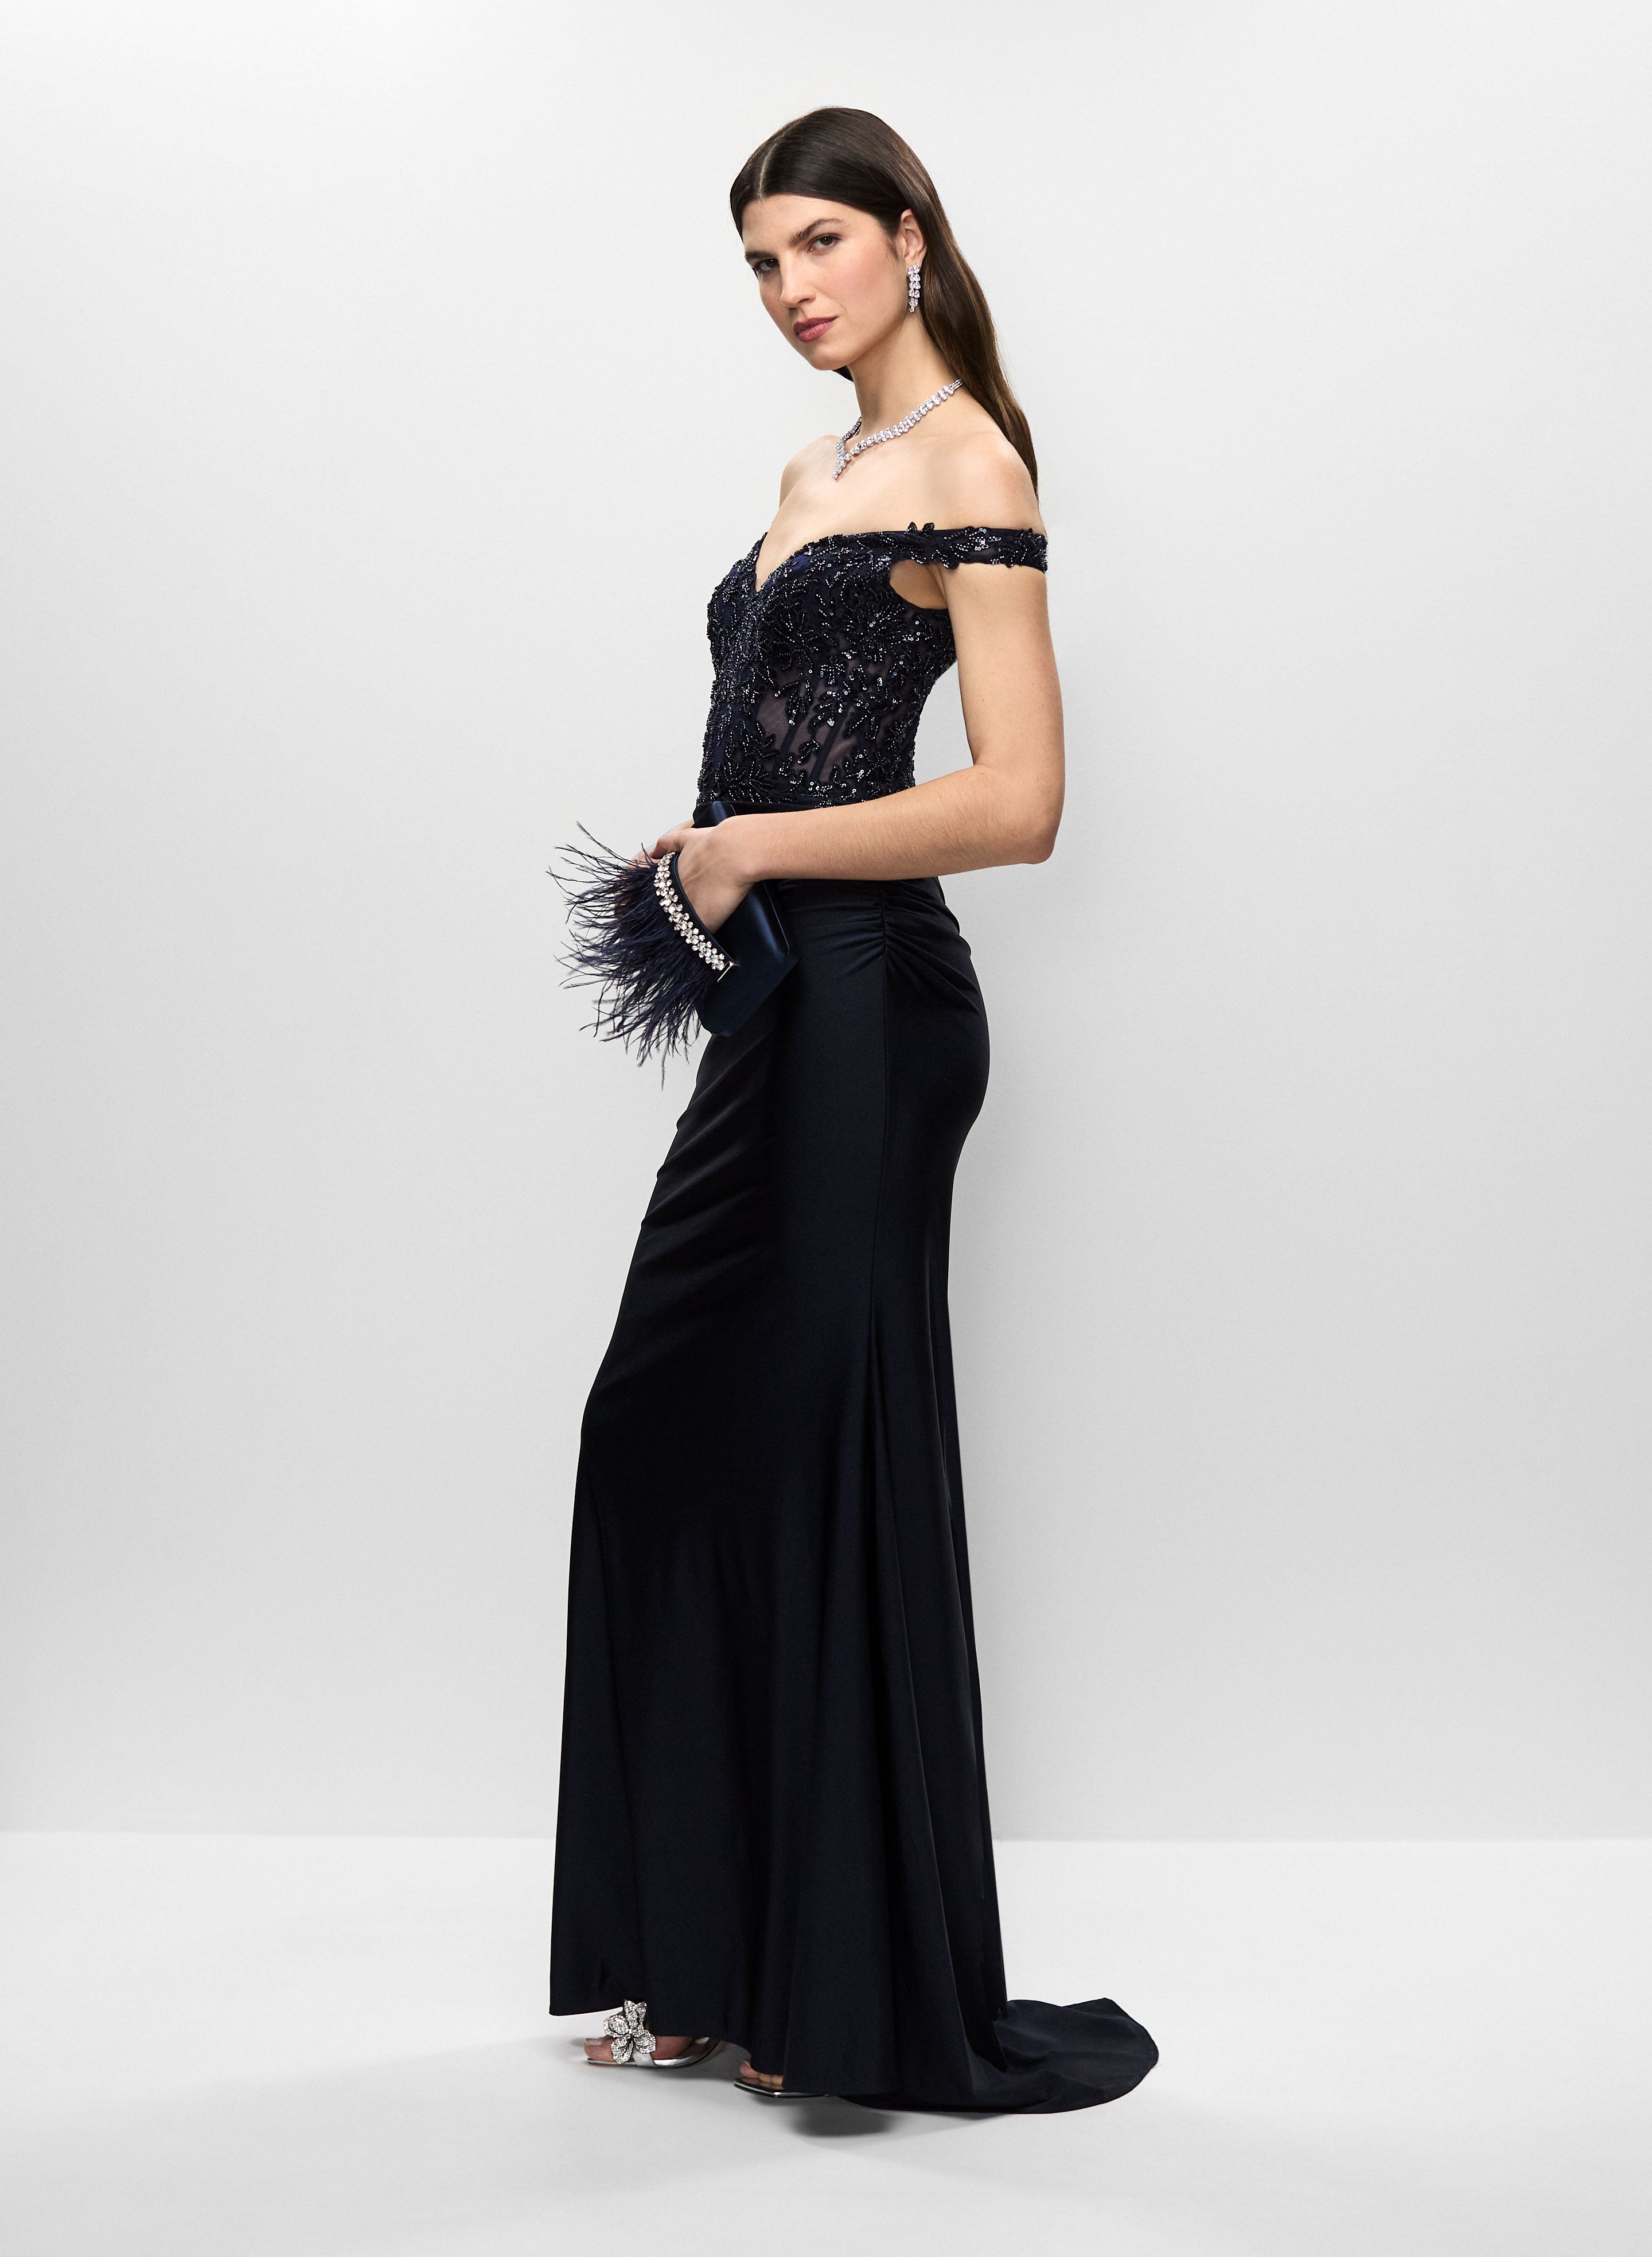 Sequinned Gown & Feather Detail Clutch